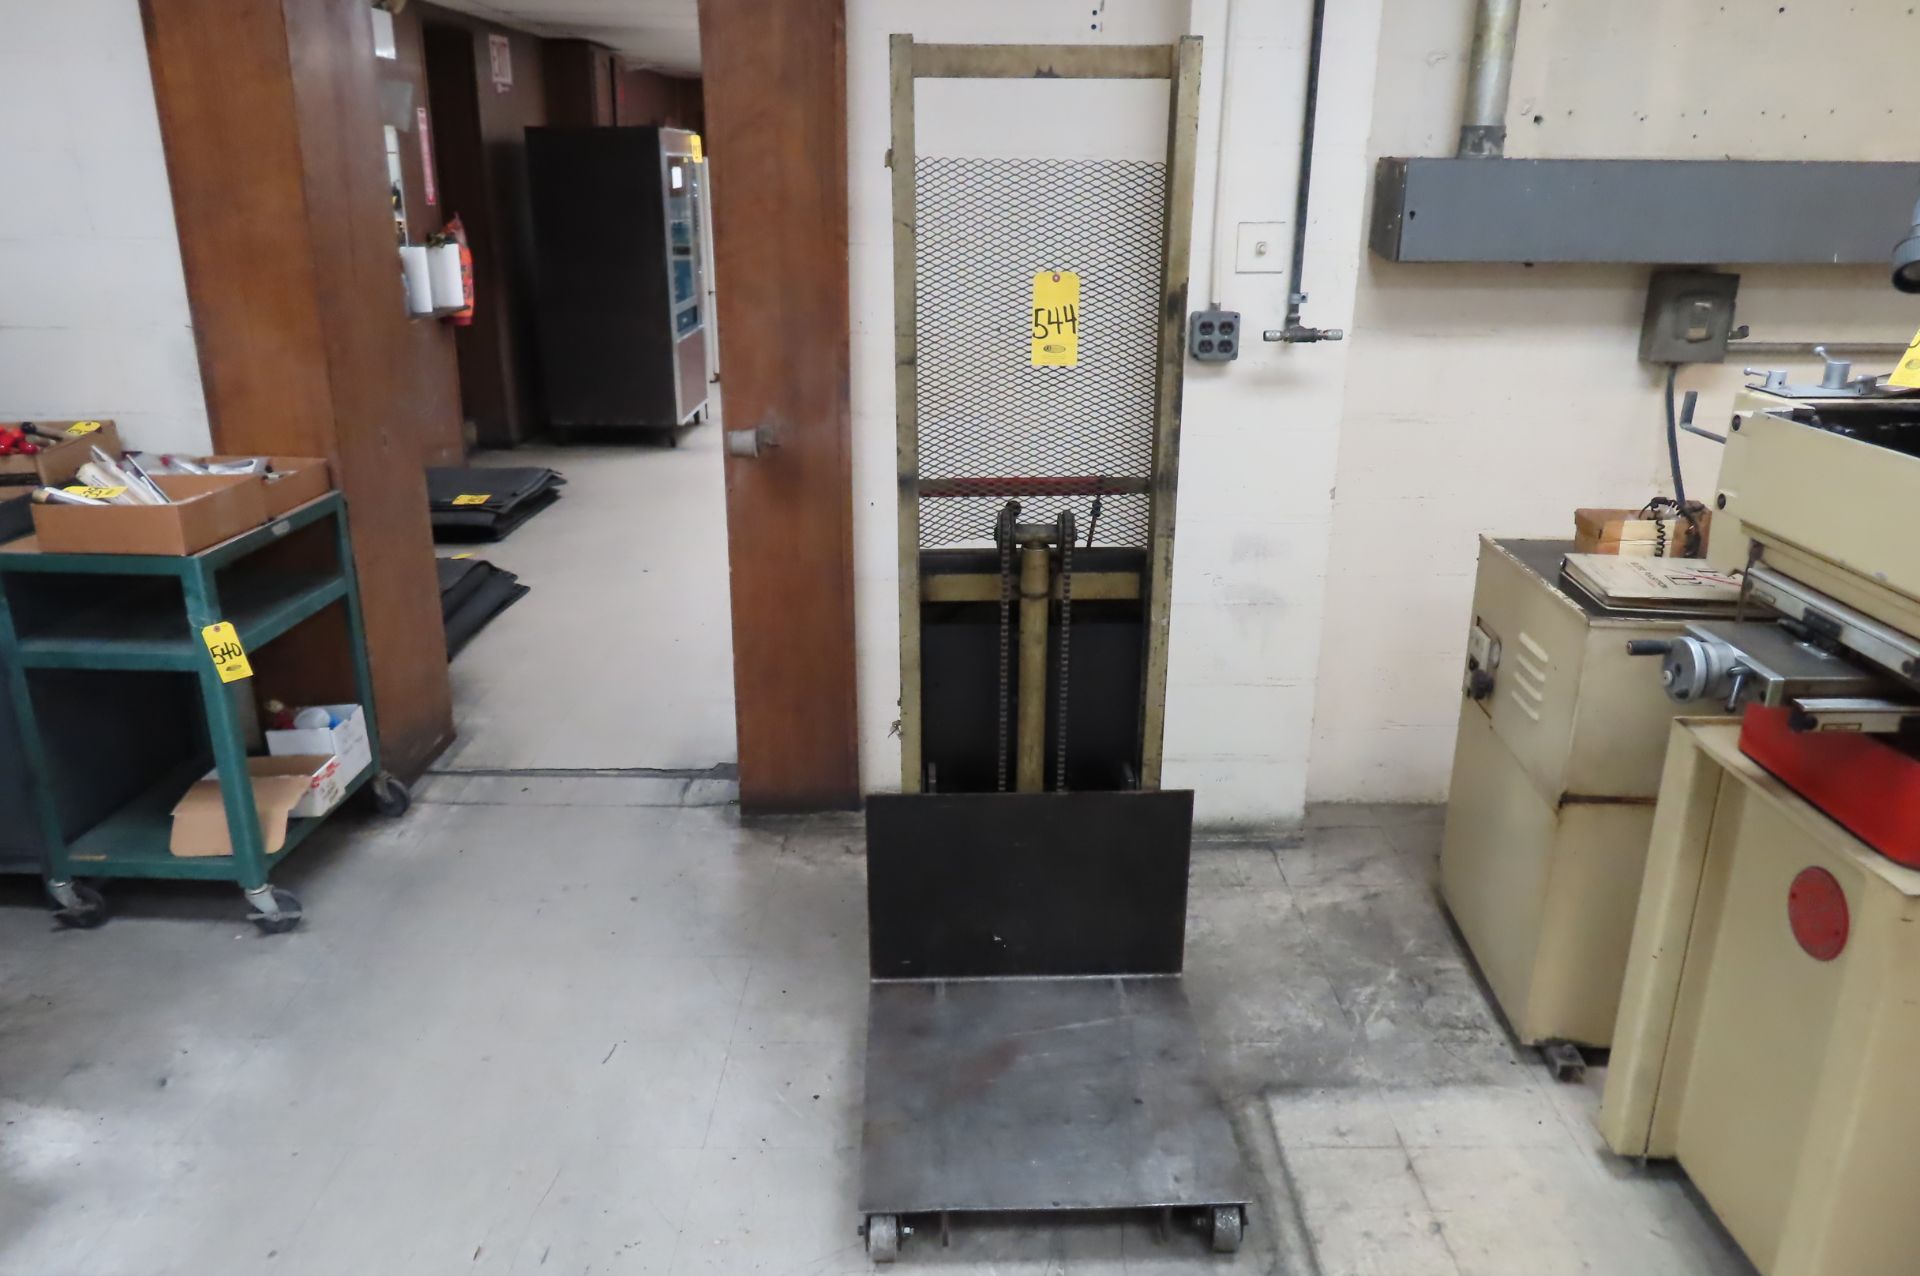 ECONOMY CW5 WALK BEHIND ELECTRIC LIFT 54-1/2 IN. LIFT, …